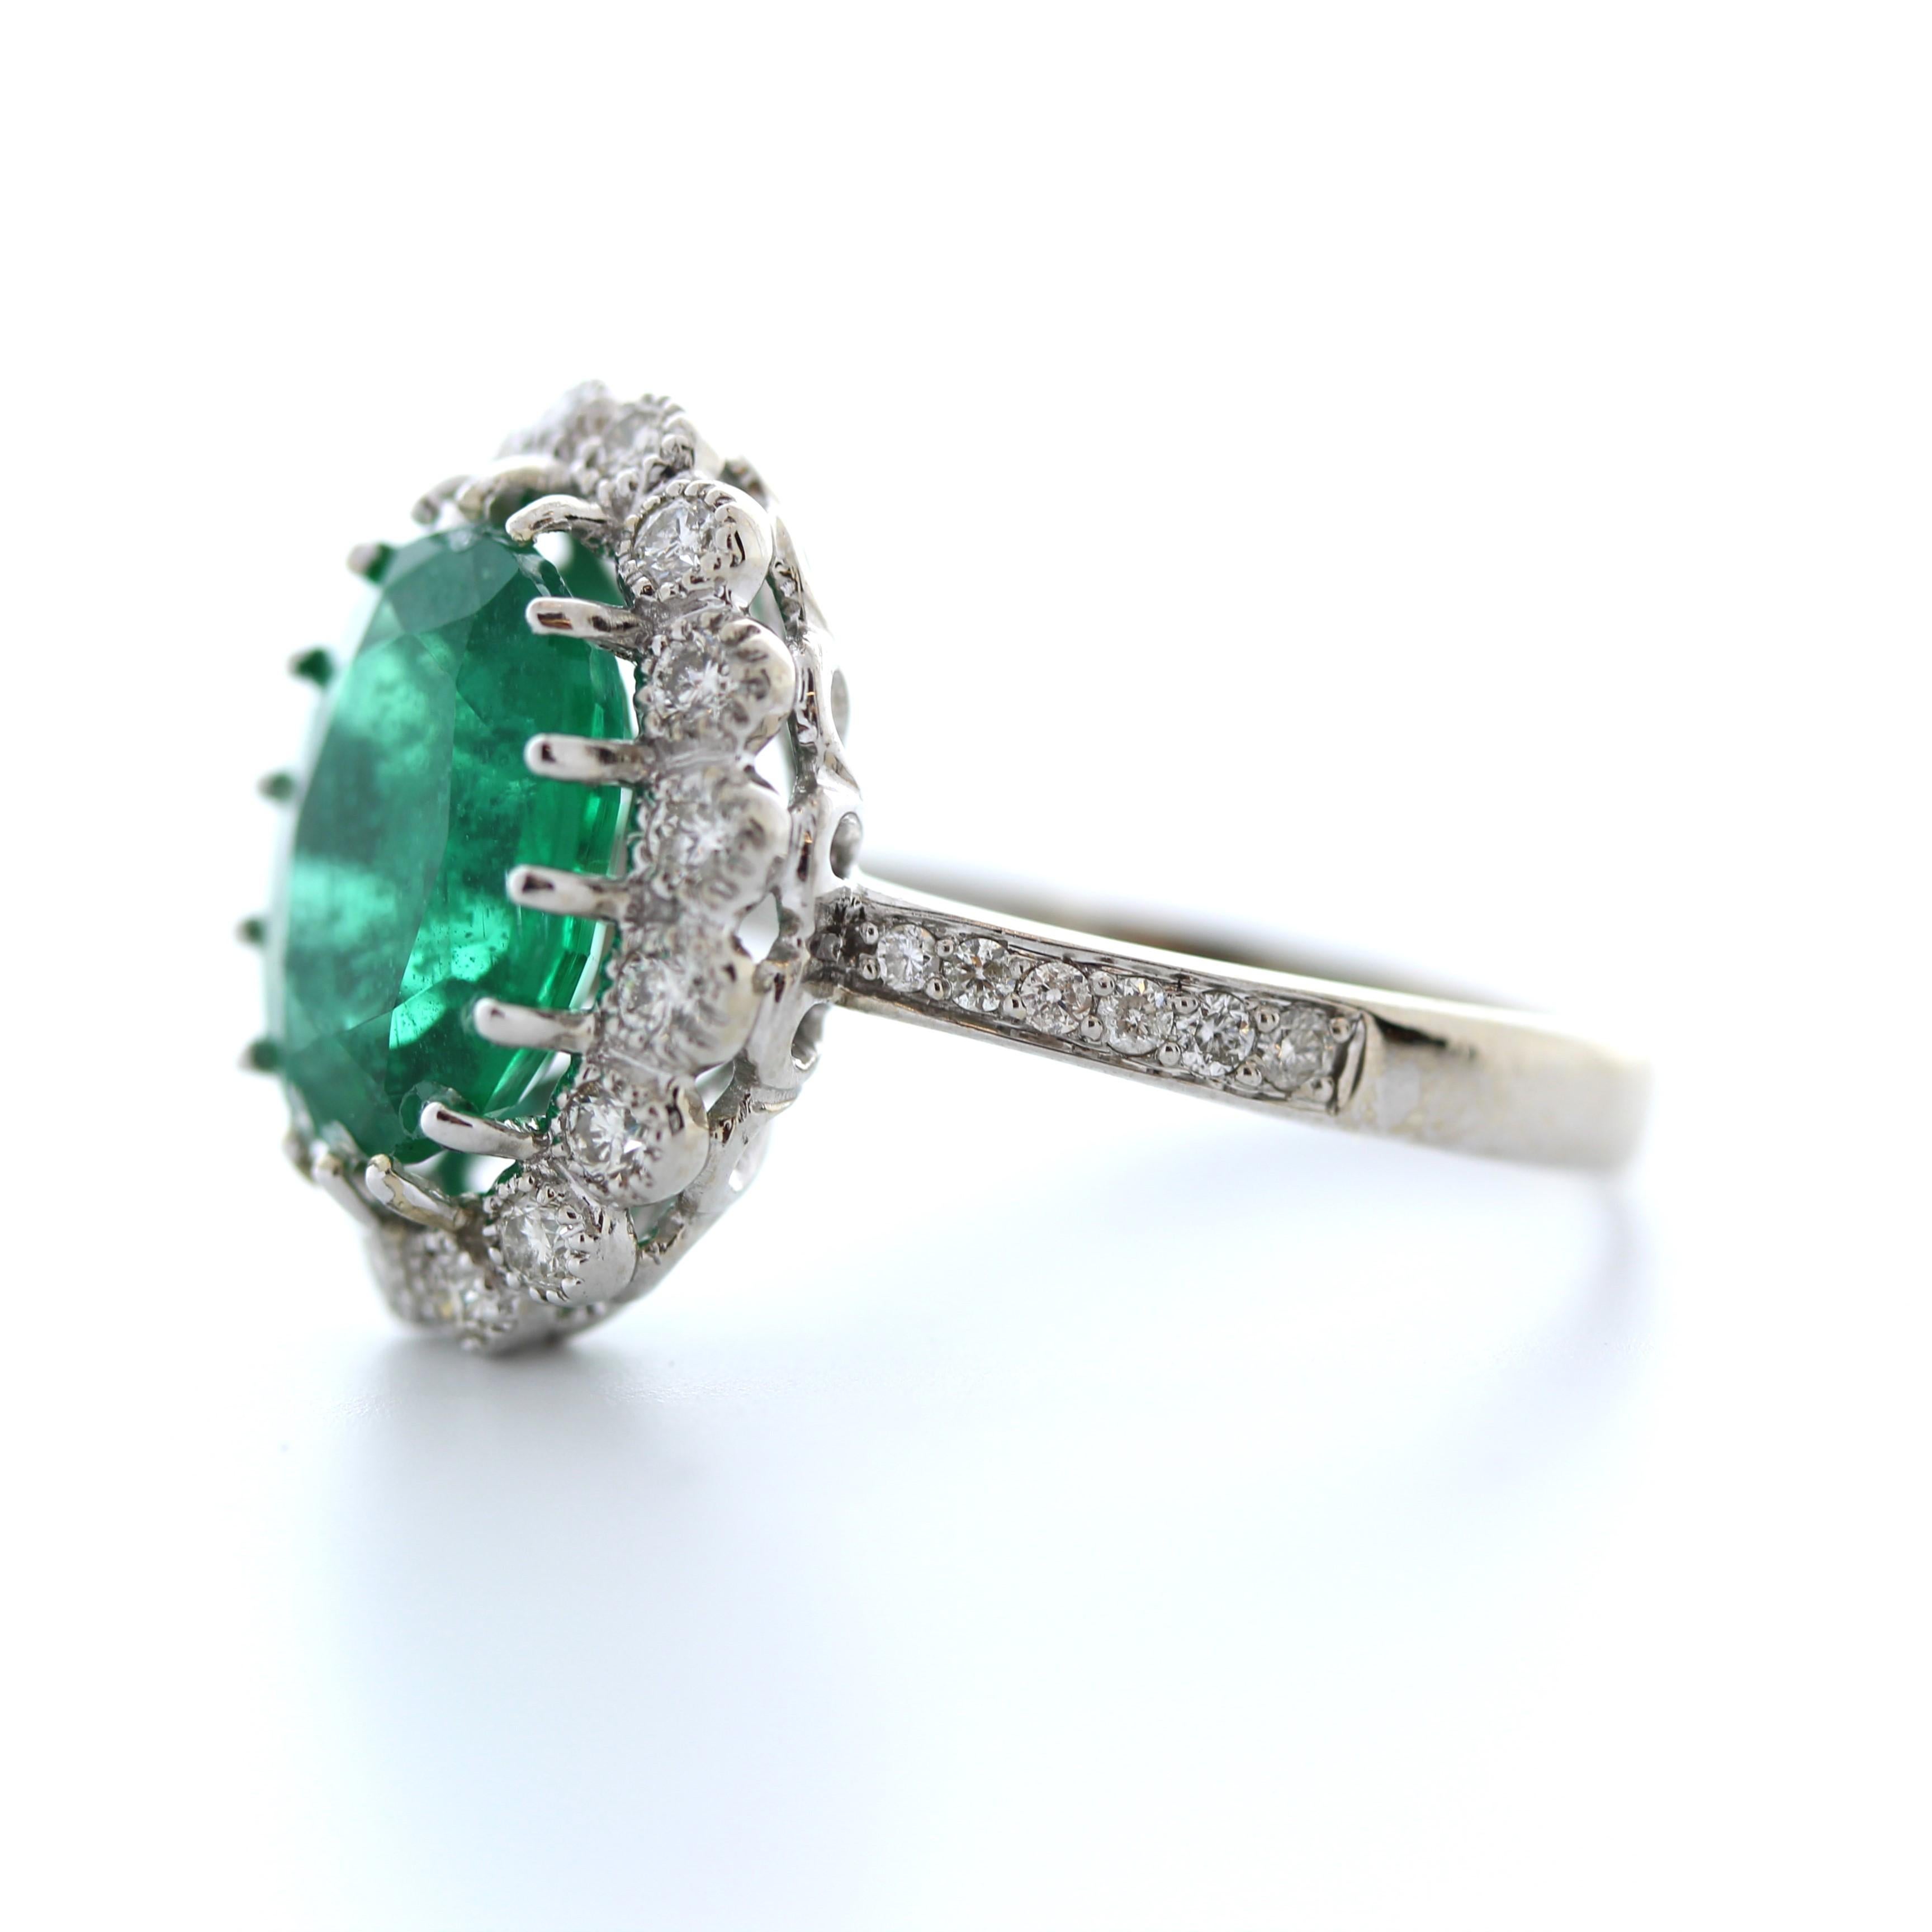 Contemporary 4.46 Carat Green Emerald Oval Shape & Diamond Ring in 14k White Gold For Sale